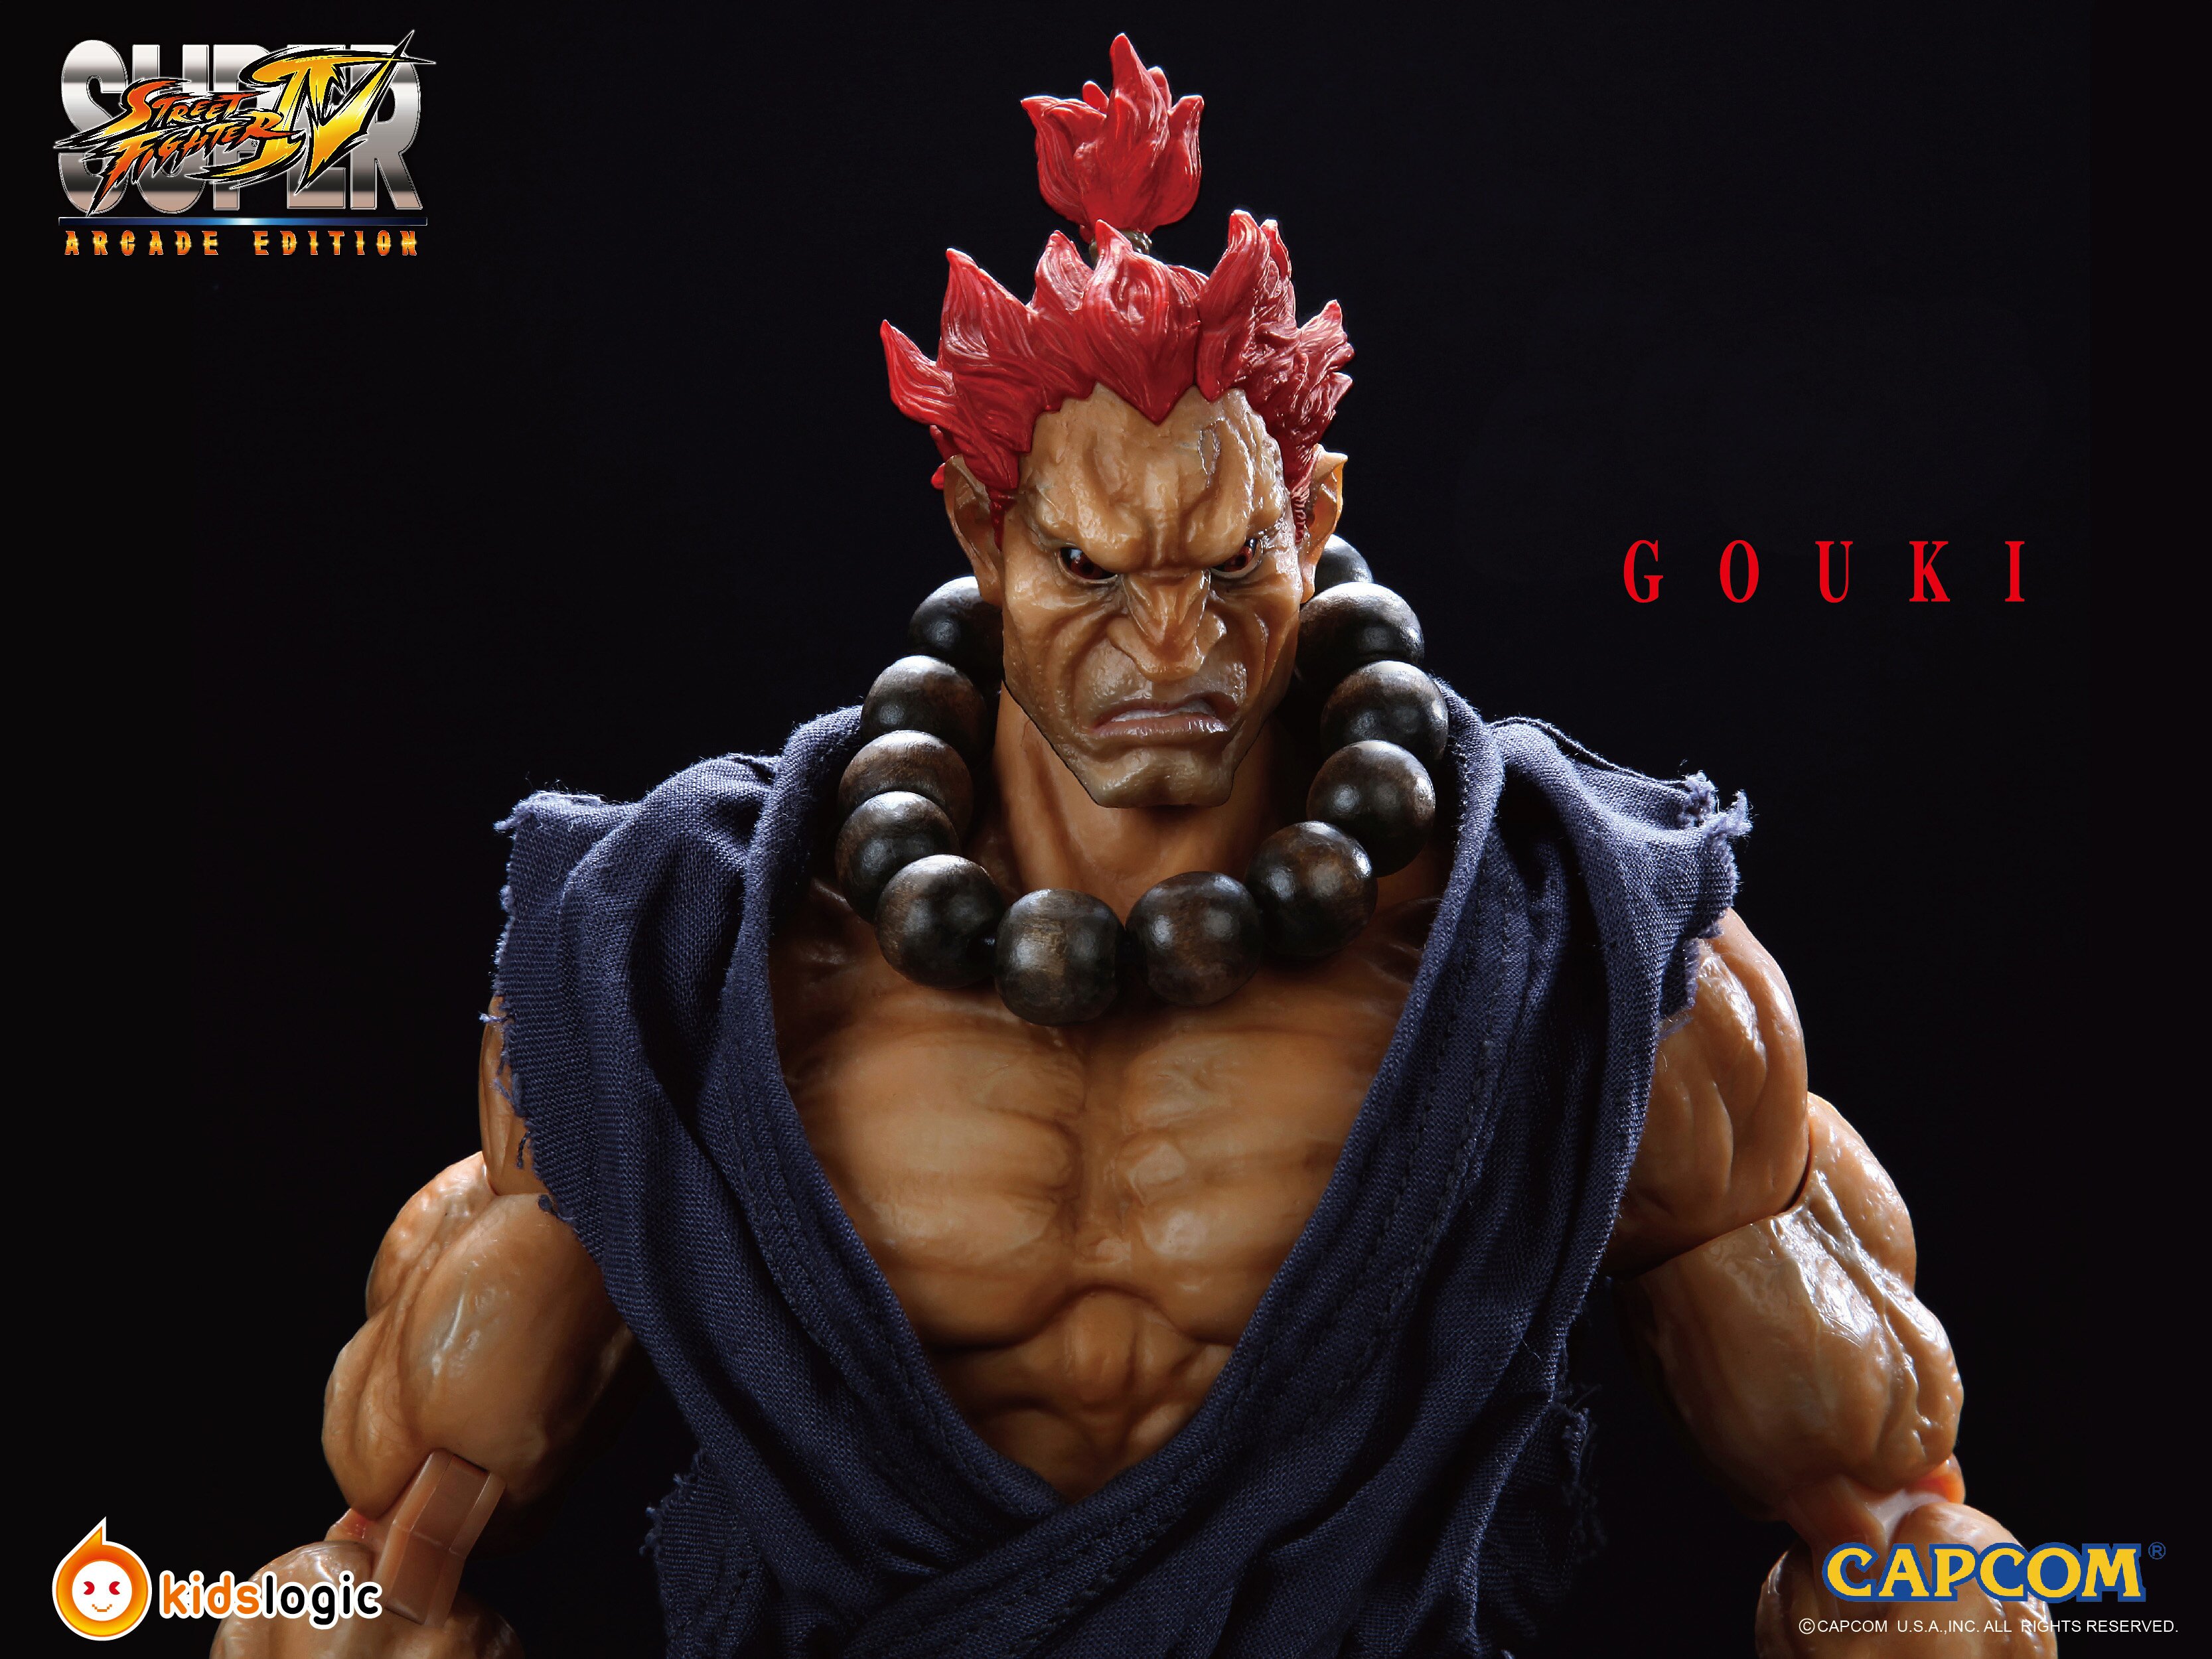 Series 4 Akuma Action Figure, Codllyne Akuma Red Hair and Blue Outfit  action figure. You might not be able to defeat Akuma in battle, but you can  own him as pa 